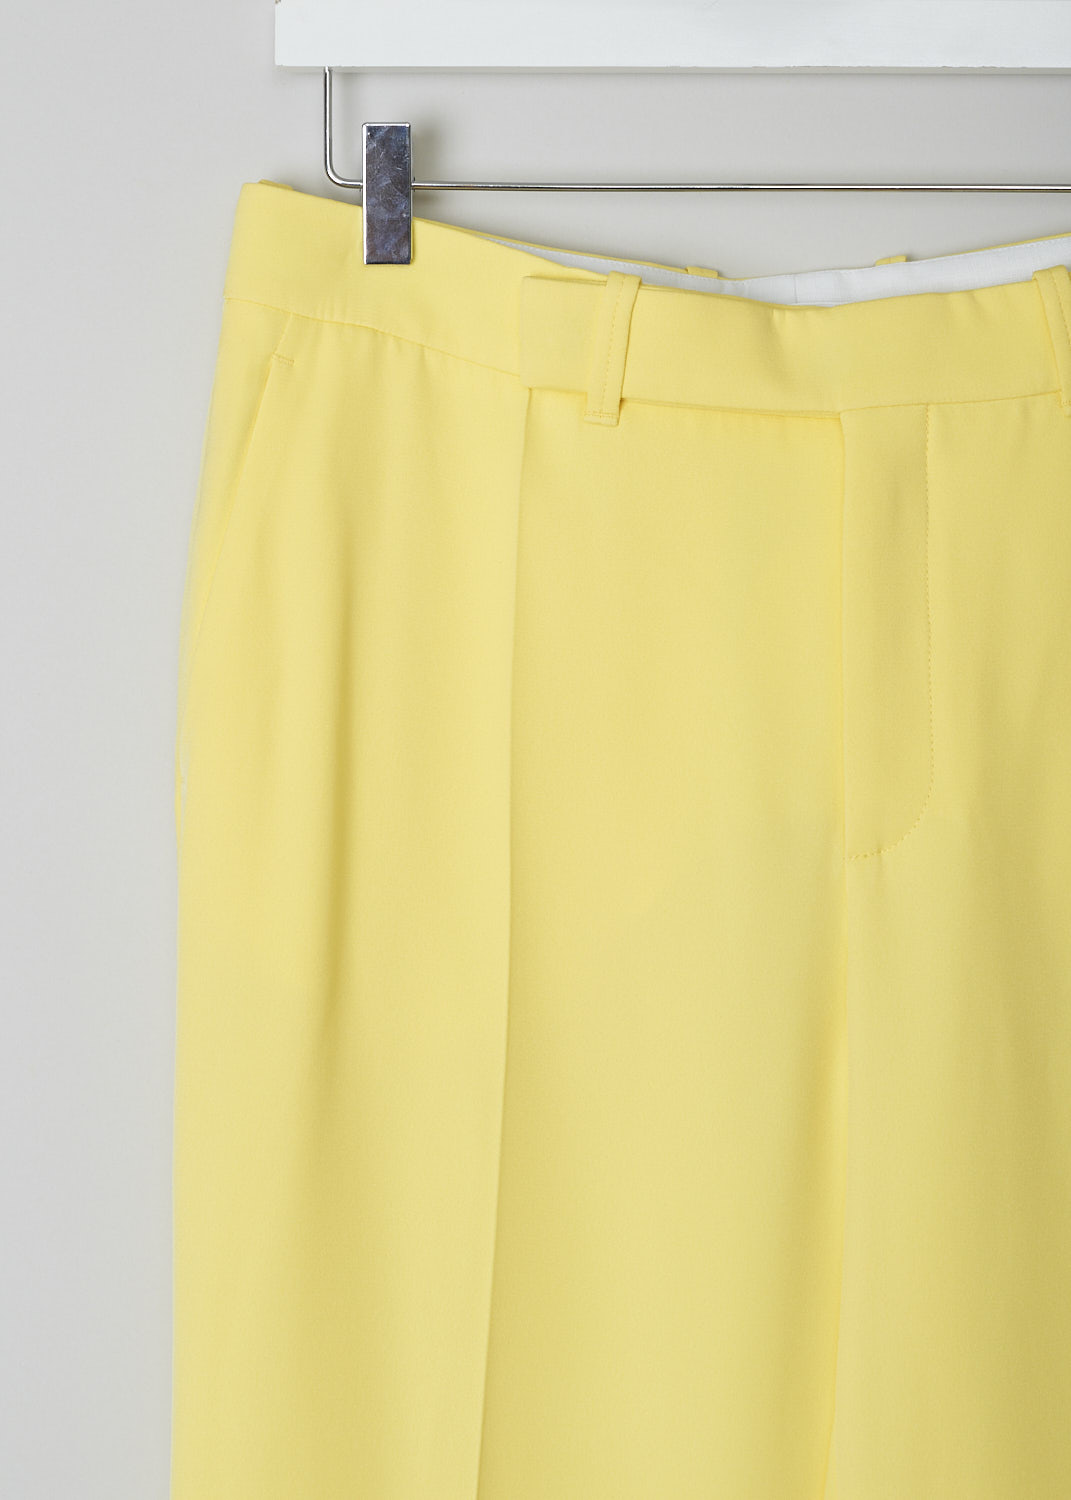 CHLOÉ, RADIANT YELLOW CLASSIC SILK PANTS, CHC22UPA12015757_RADIANT_YELLOW, Yellow, Detail, These radiant yellow high-waisted pants have a waistband with belt loops and a concealed front zip and clasp closure. These pants have straight, cropped pant legs with pressed centre creases with slanted pockets in the front and welt pockets in the back.
